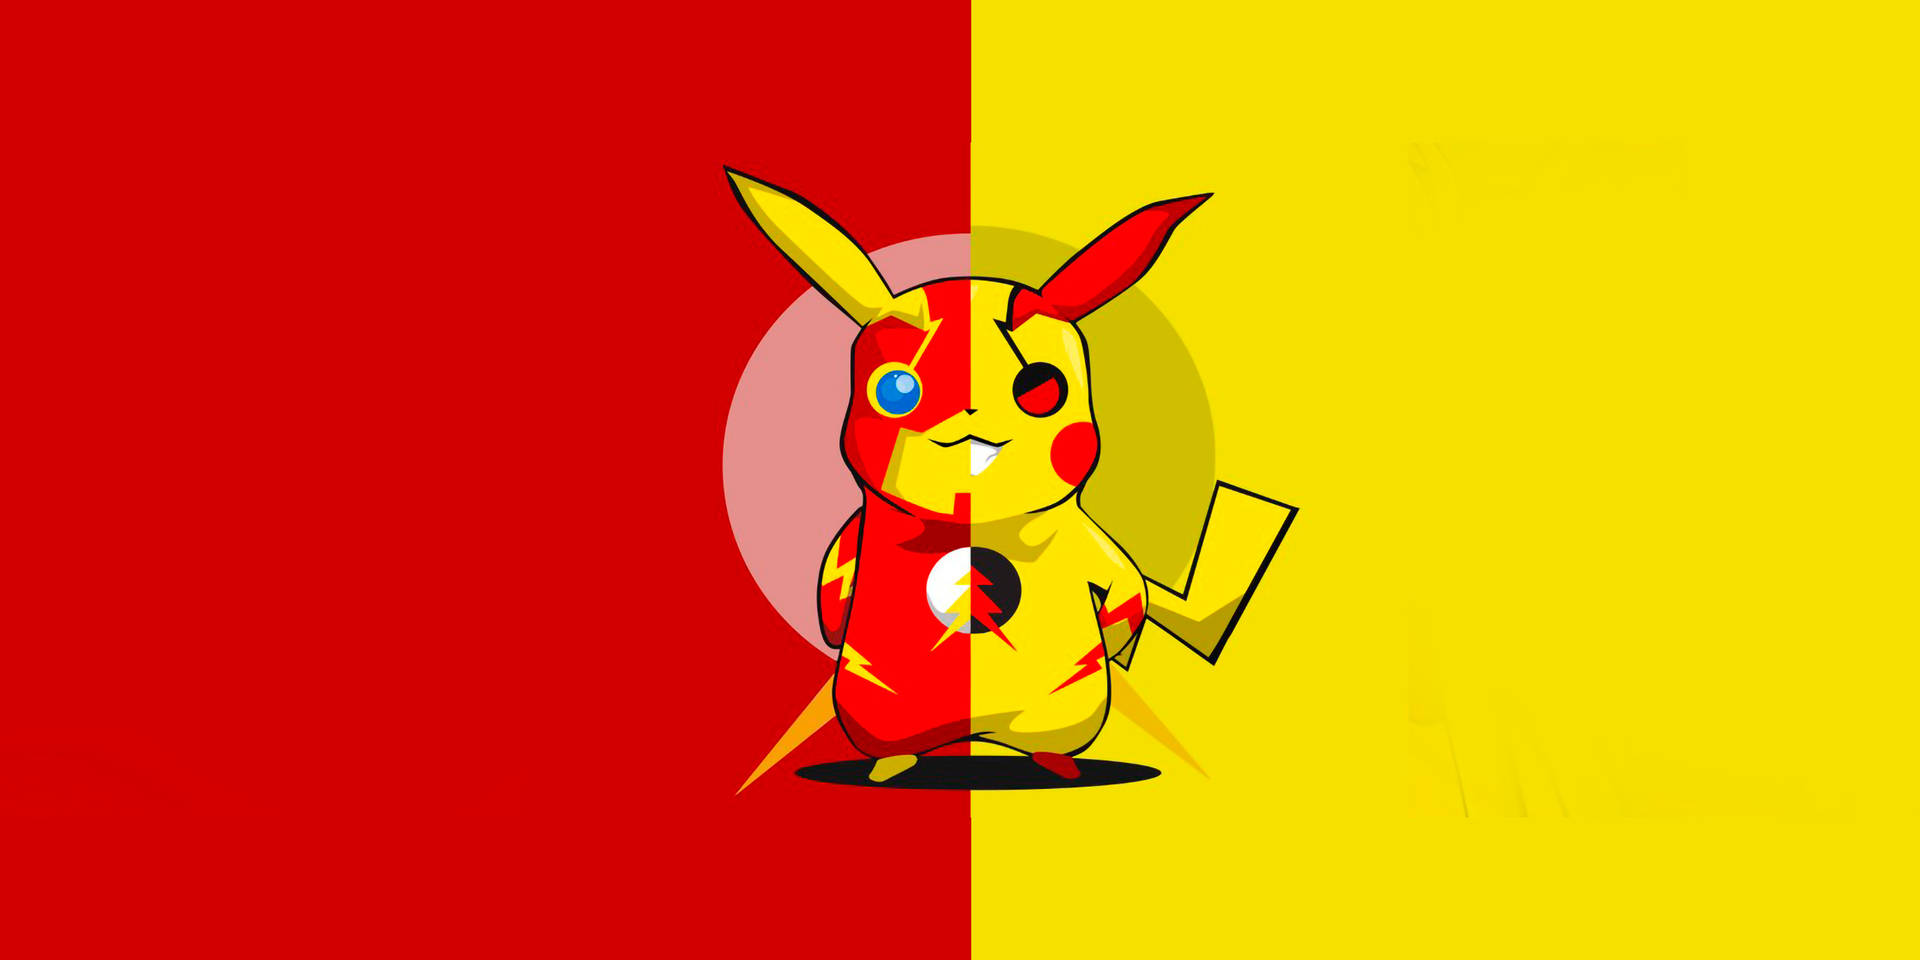 Pikachu In Red And Yellow Background